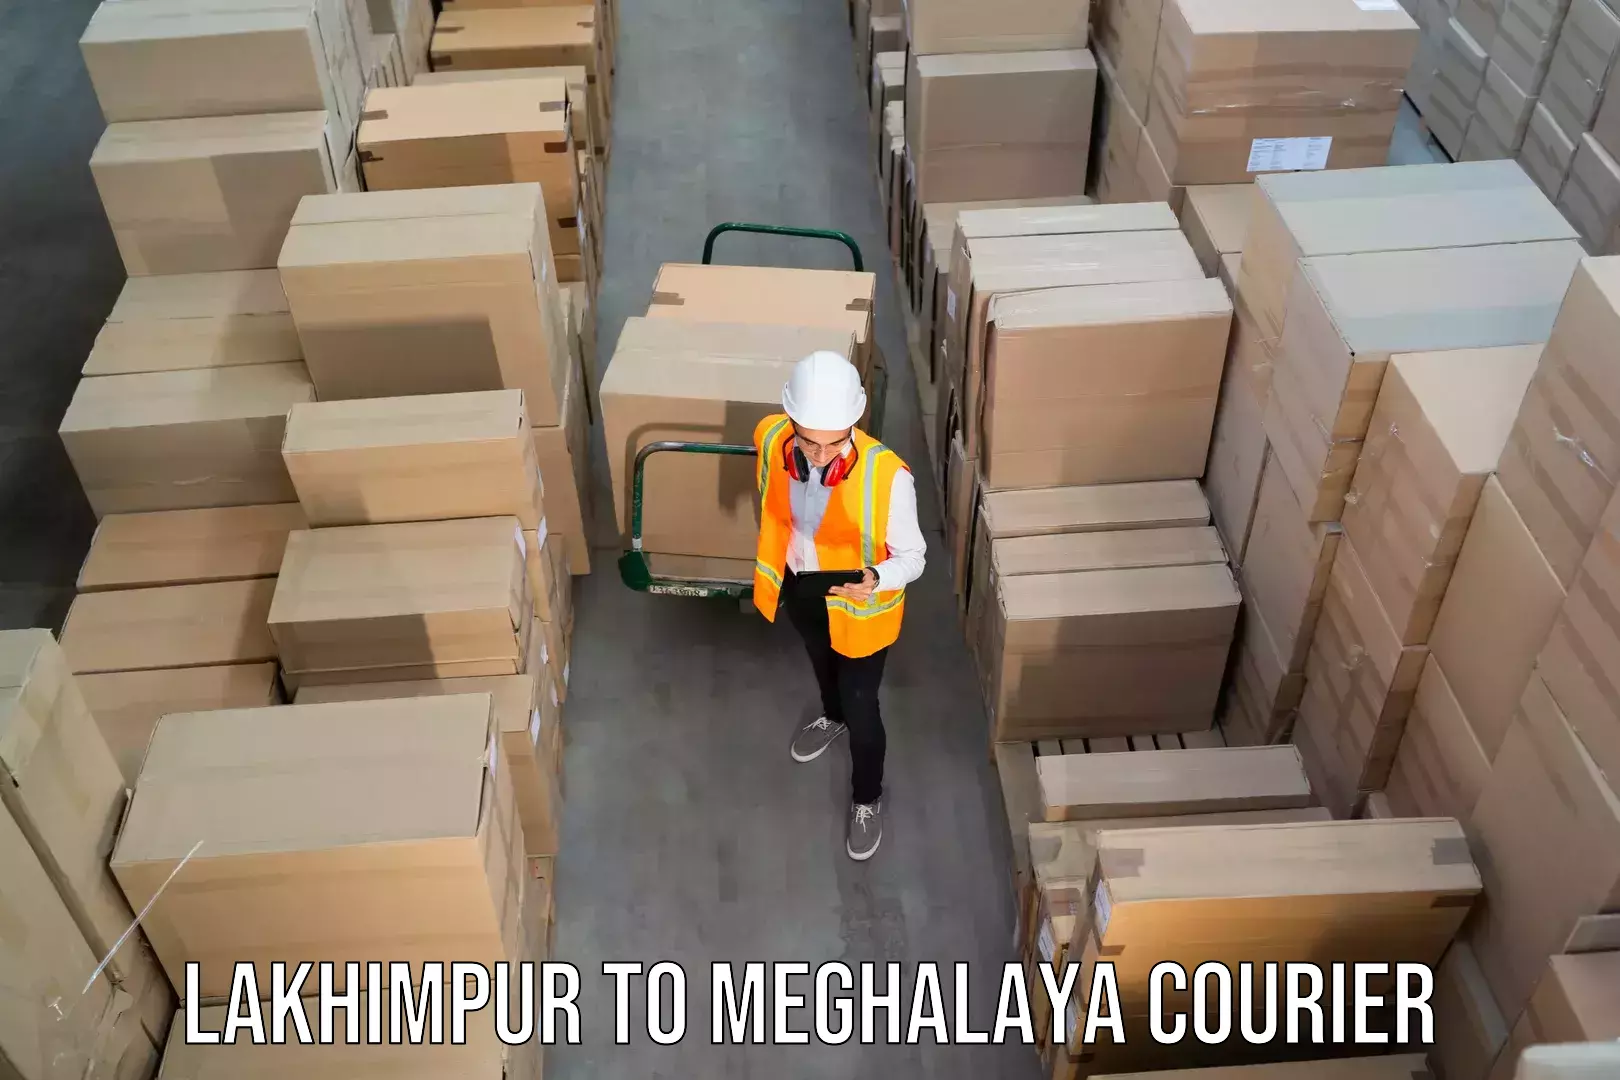 State-of-the-art courier technology Lakhimpur to Cherrapunji